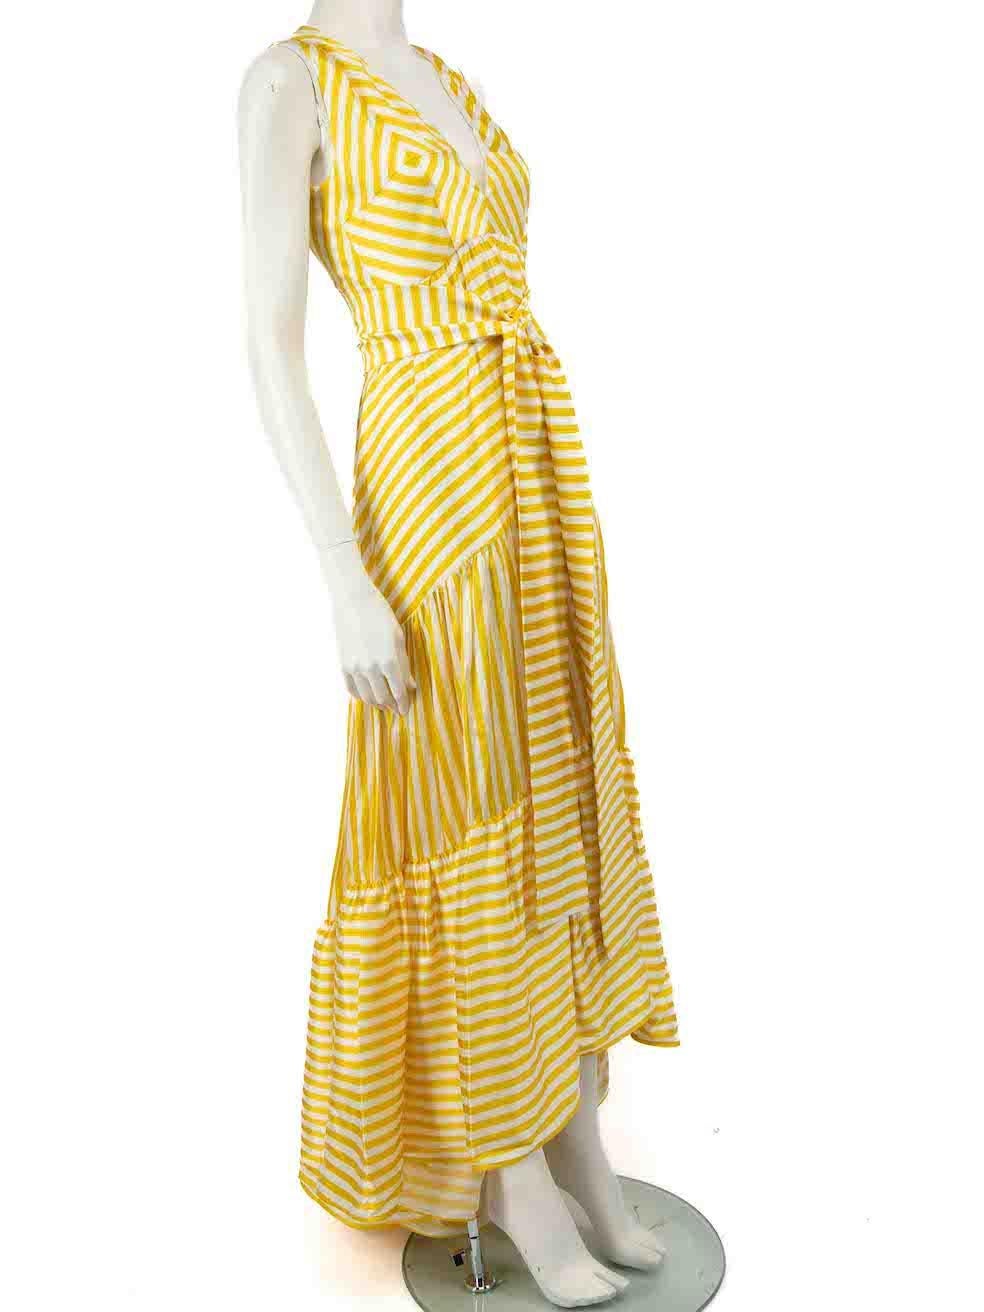 CONDITION is Very good. Minimal wear to dress is evident. Minimal loose thread to seam of neckline lining on this used Silvia Tcherassi designer resale item.
 
 
 
 Details
 
 
 Yellow
 
 Silk
 
 Maxi dress
 
 Striped pattern
 
 V neckline
 
